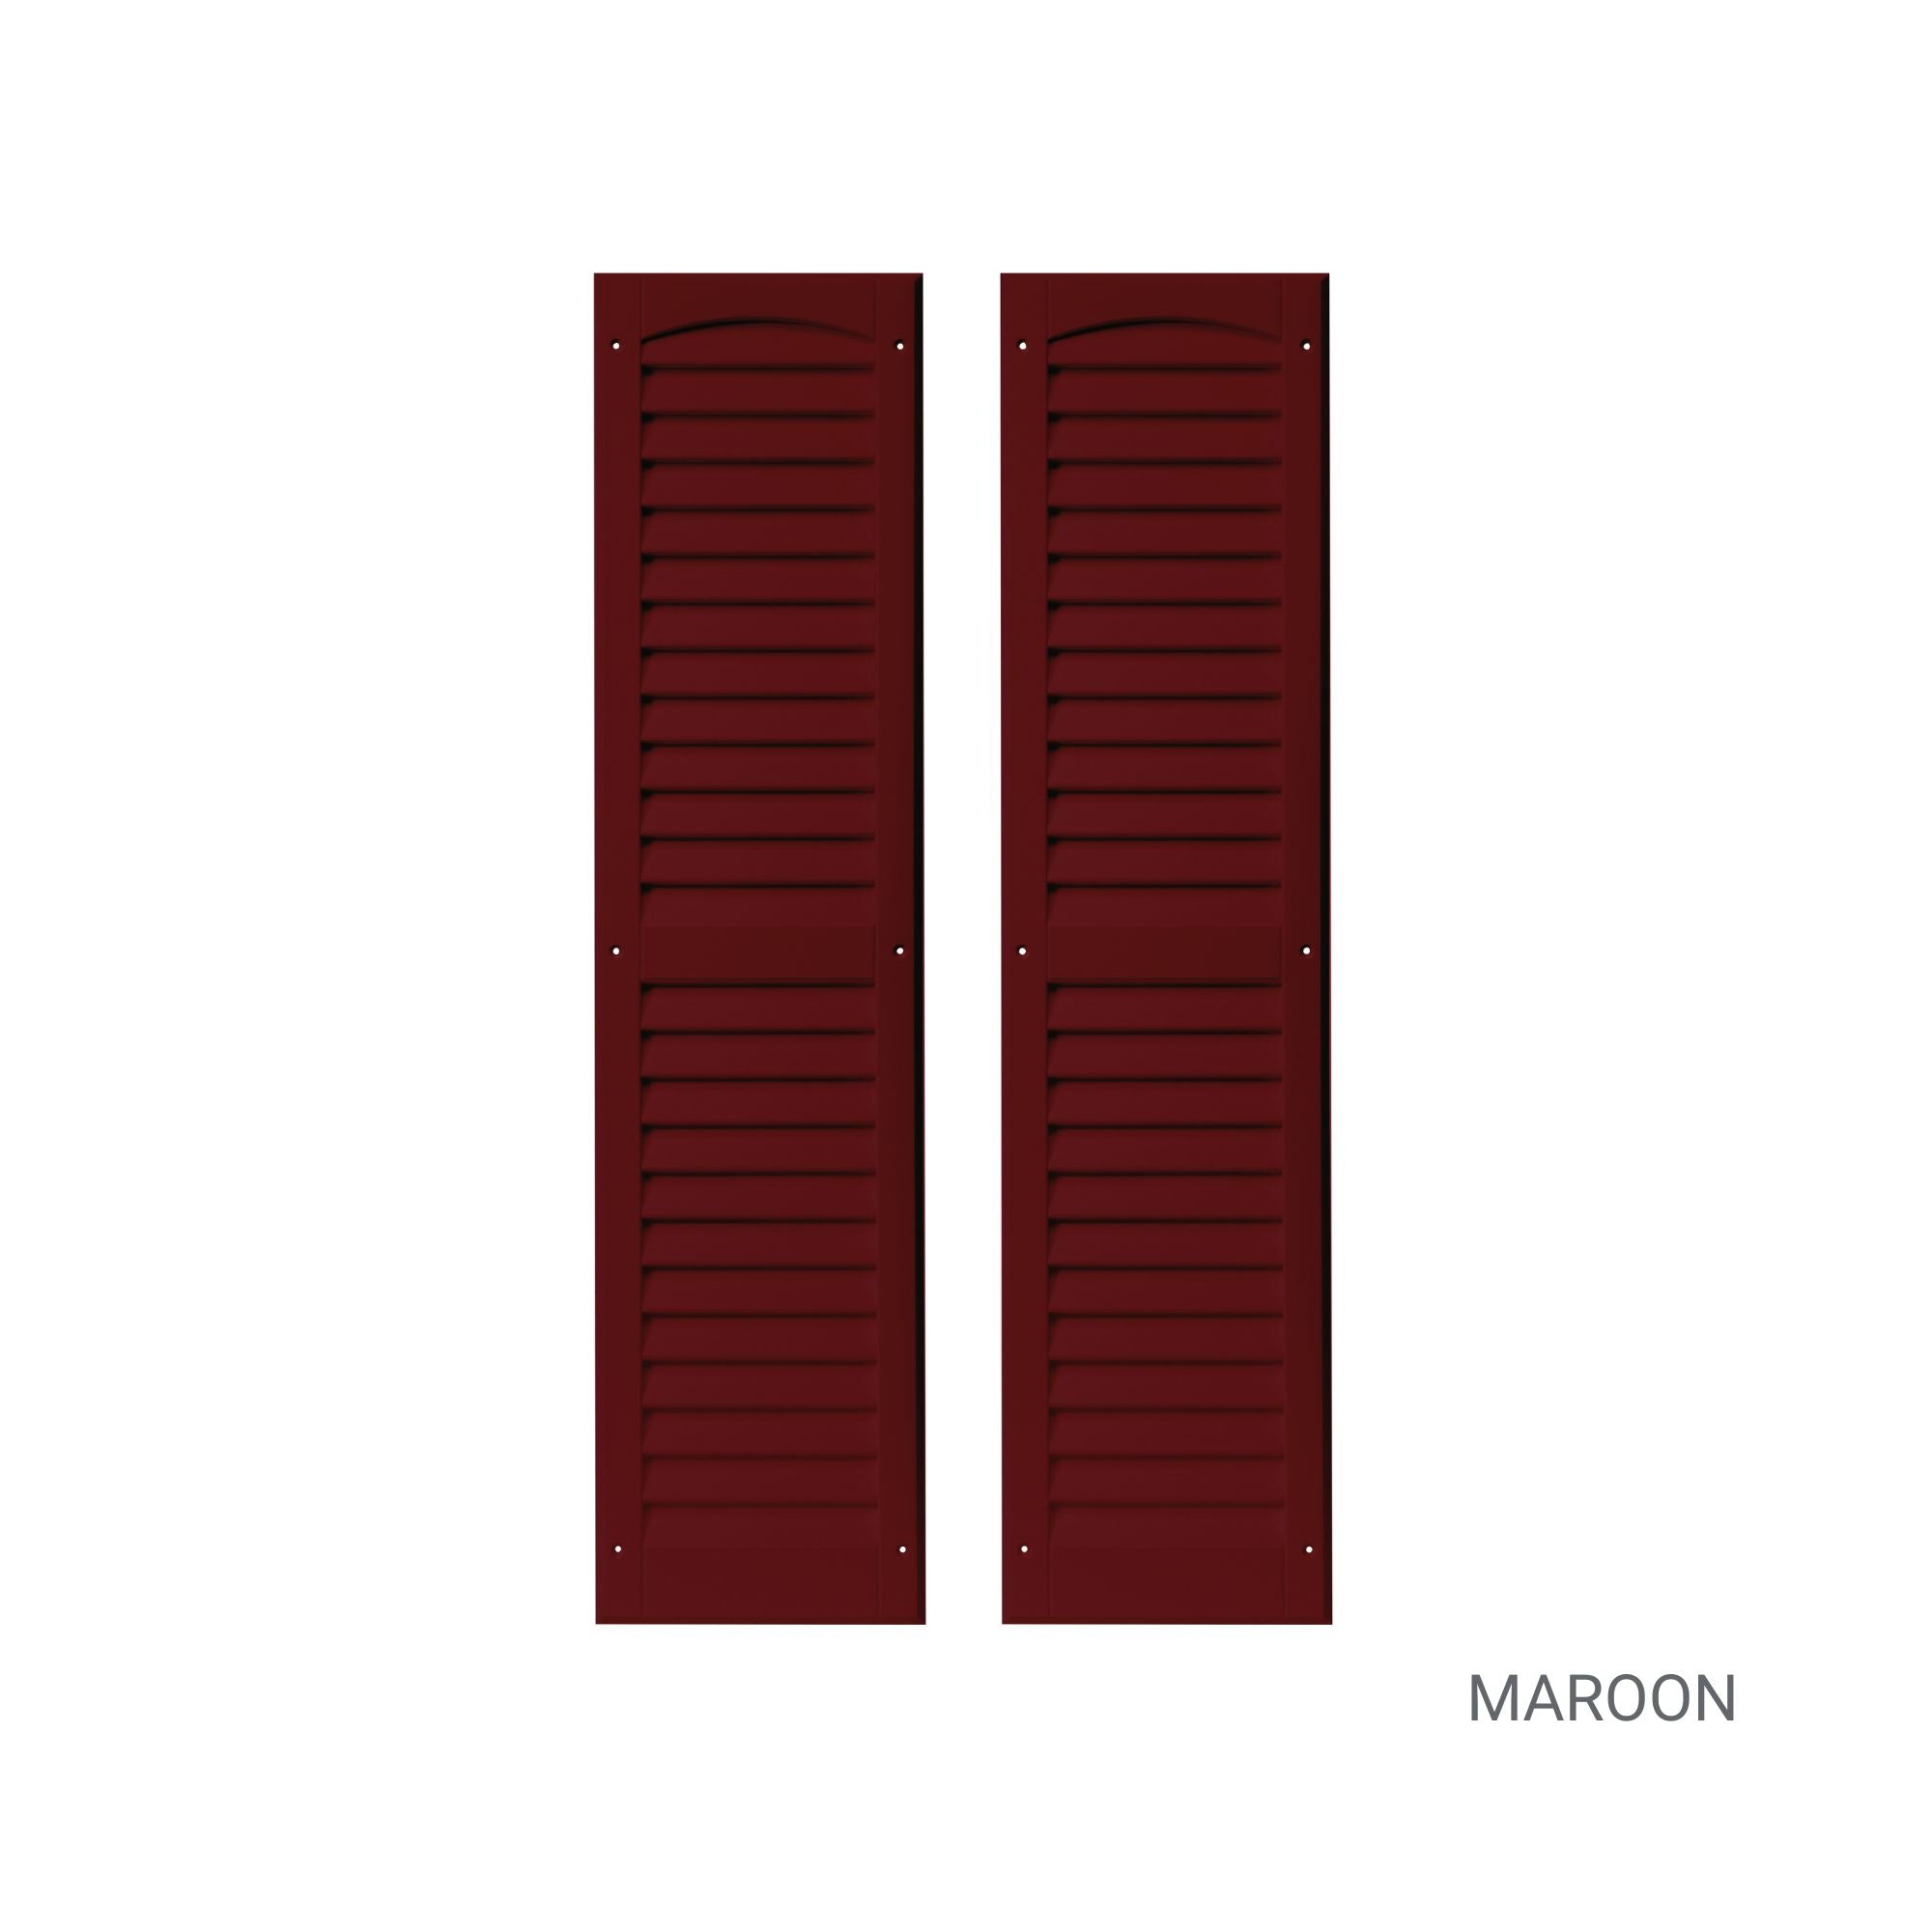 Pair of 9" W x 36" H Louvered Maroon Shutters for Sheds, Playhouses, and MORE